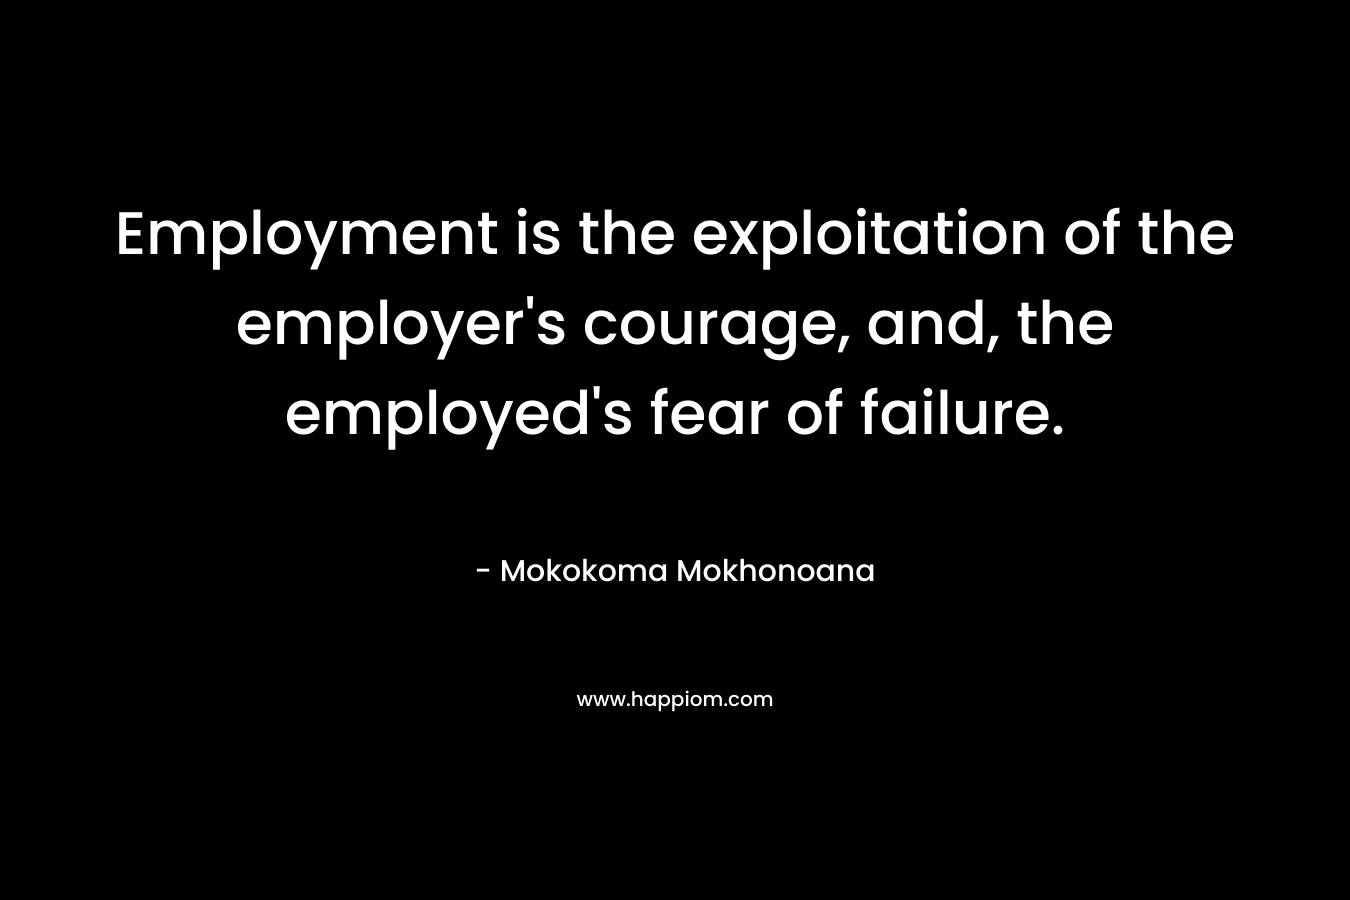 Employment is the exploitation of the employer’s courage, and, the employed’s fear of failure. – Mokokoma Mokhonoana